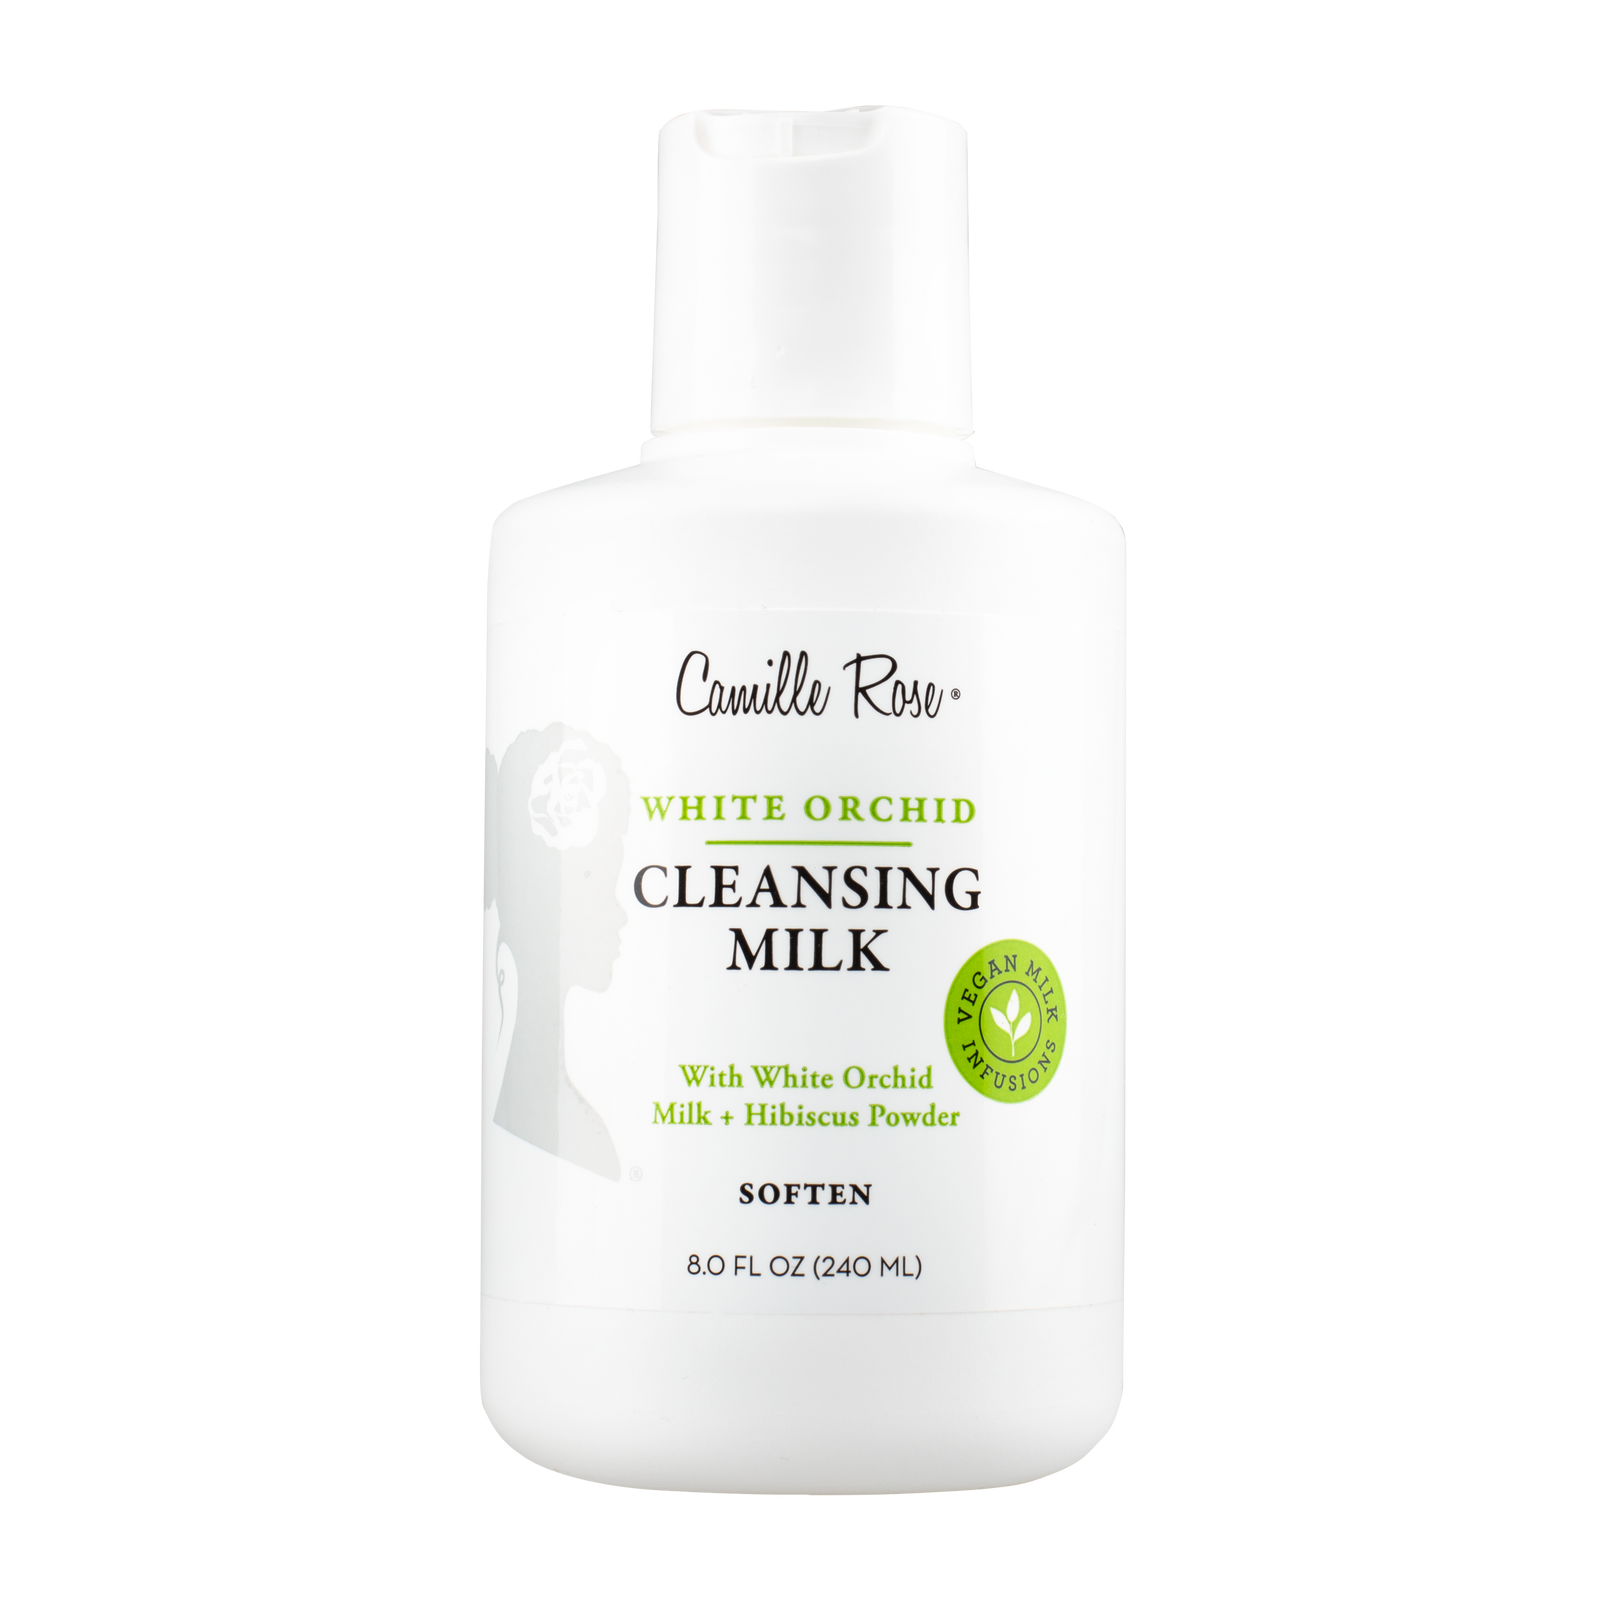 White Orchid Cleansing Milk